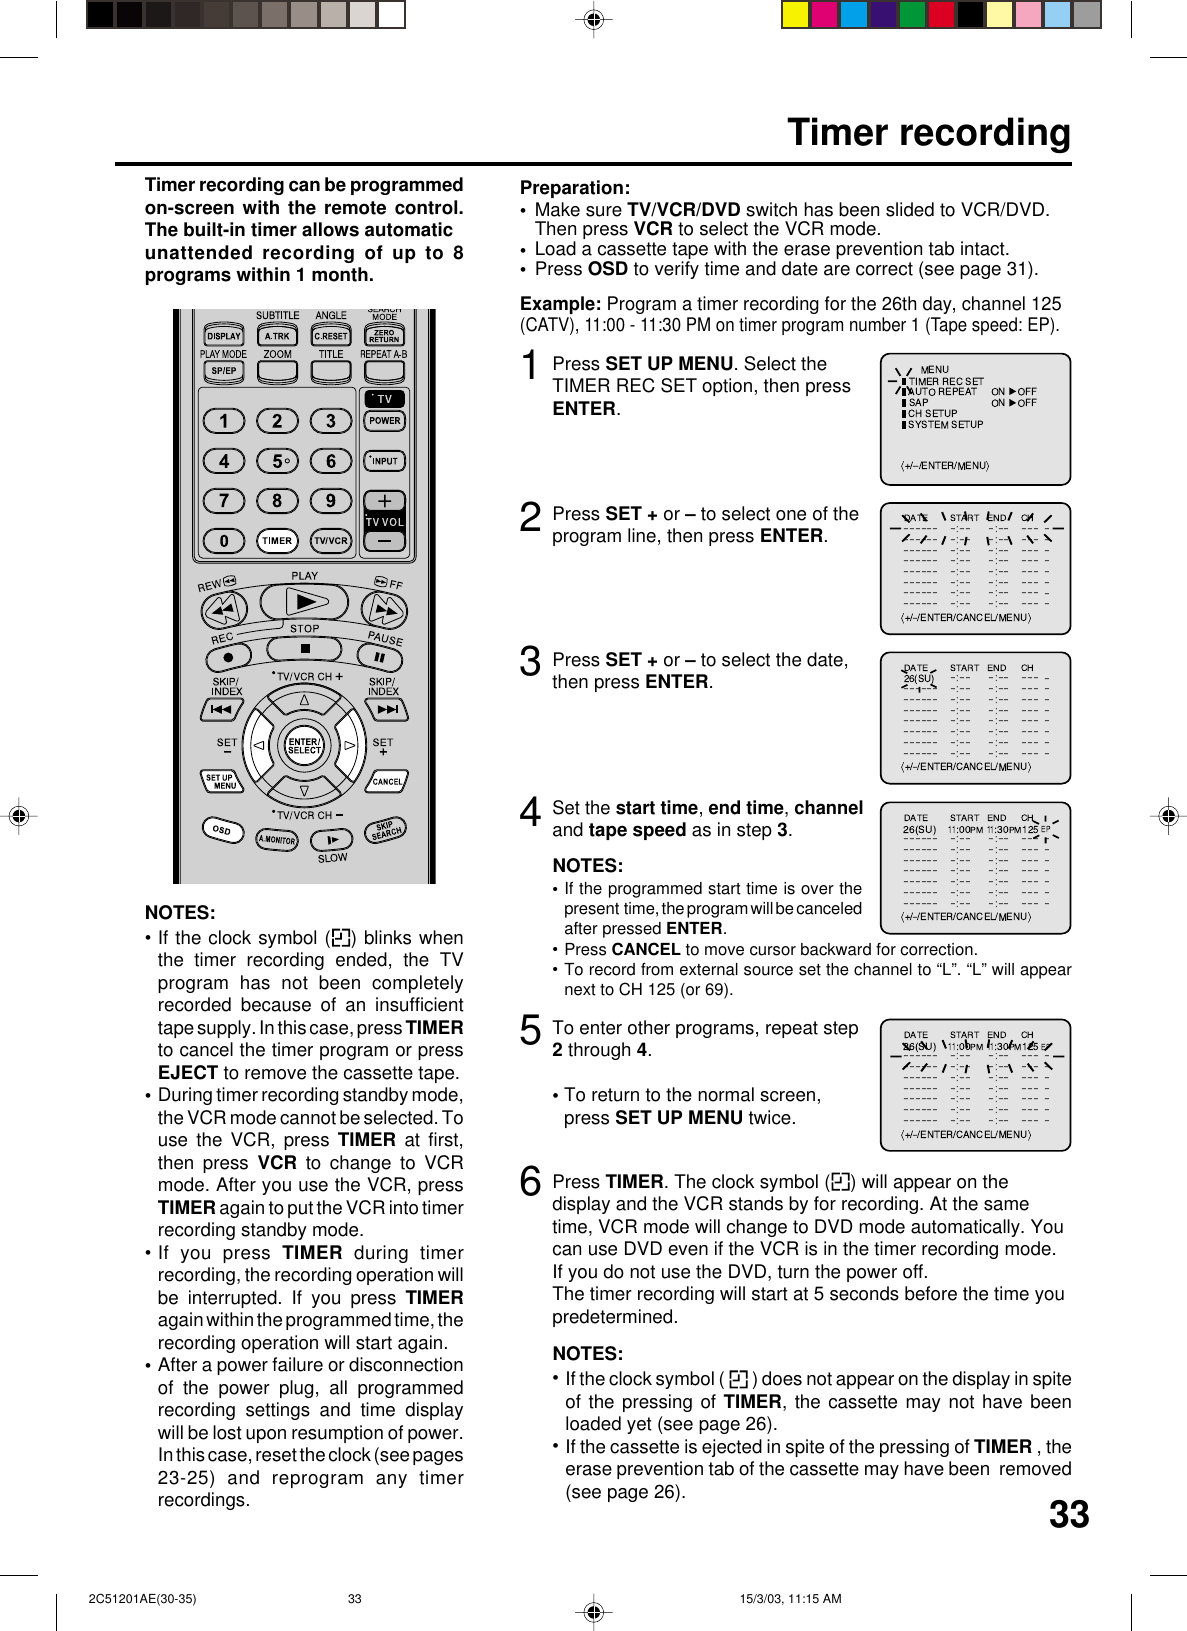 333Timer recordingPress SET UP MENU. Select theTIMER REC SET option, then pressENTER.Press SET + or – to select the date,then press ENTER.12Press SET + or – to select one of theprogram line, then press ENTER.4Make sure TV/VCR/DVD switch has been slided to VCR/DVD.Then press VCR to select the VCR mode.Load a cassette tape with the erase prevention tab intact.Press OSD to verify time and date are correct (see page 31).Preparation:•••Timer recording can be programmedon-screen with the remote control.The built-in timer allows automaticunattended recording of up to 8programs within 1 month.Set the start time, end time, channeland tape speed as in step 3.Example: Program a timer recording for the 26th day, channel 125(CATV), 11:00 - 11:30 PM on timer program number 1 (Tape speed: EP).NOTES:If the programmed start time is over thepresent  time, the program will be canceledafter pressed ENTER.•••5To enter other programs, repeat step2 through 4.• To return to the normal screen,press SET UP MENU twice.6Press TIMER. The clock symbol ( ) will appear on thedisplay and the VCR stands by for recording. At the sametime, VCR mode will change to DVD mode automatically. Youcan use DVD even if the VCR is in the timer recording mode.If you do not use the DVD, turn the power off.The timer recording will start at 5 seconds before the time youpredetermined.NOTES:If the clock symbol (   ) does not appear on the display in spiteof the pressing of TIMER, the cassette may not have beenloaded yet (see page 26).If the cassette is ejected in spite of the pressing of TIMER , theerase prevention tab of the cassette may have been  removed(see page 26).••NOTES:If the clock symbol ( ) blinks whenthe timer recording ended, the TVprogram has not been completelyrecorded because of an insufficienttape supply. In this case, press TIMERto cancel the timer program or pressEJECT to remove the cassette tape.During timer recording standby mode,the VCR mode cannot be selected. Touse the VCR, press TIMER at first,then press VCR to change to VCRmode. After you use the VCR, pressTIMER again to put the VCR into timerrecording standby mode.If you press TIMER during timerrecording, the recording operation willbe interrupted. If you press TIMERagain within the programmed time, therecording operation will start again.After a power failure or disconnectionof the power plug, all programmedrecording settings and time displaywill be lost upon resumption of power.In this case, reset the clock (see pages23-25) and reprogram any timerrecordings.••••Press CANCEL to move cursor backward for correction.To record from external source set the channel to “L”. “L” will appearnext to CH 125 (or 69). 2C51201AE(30-35) 15/3/03, 11:15 AM33